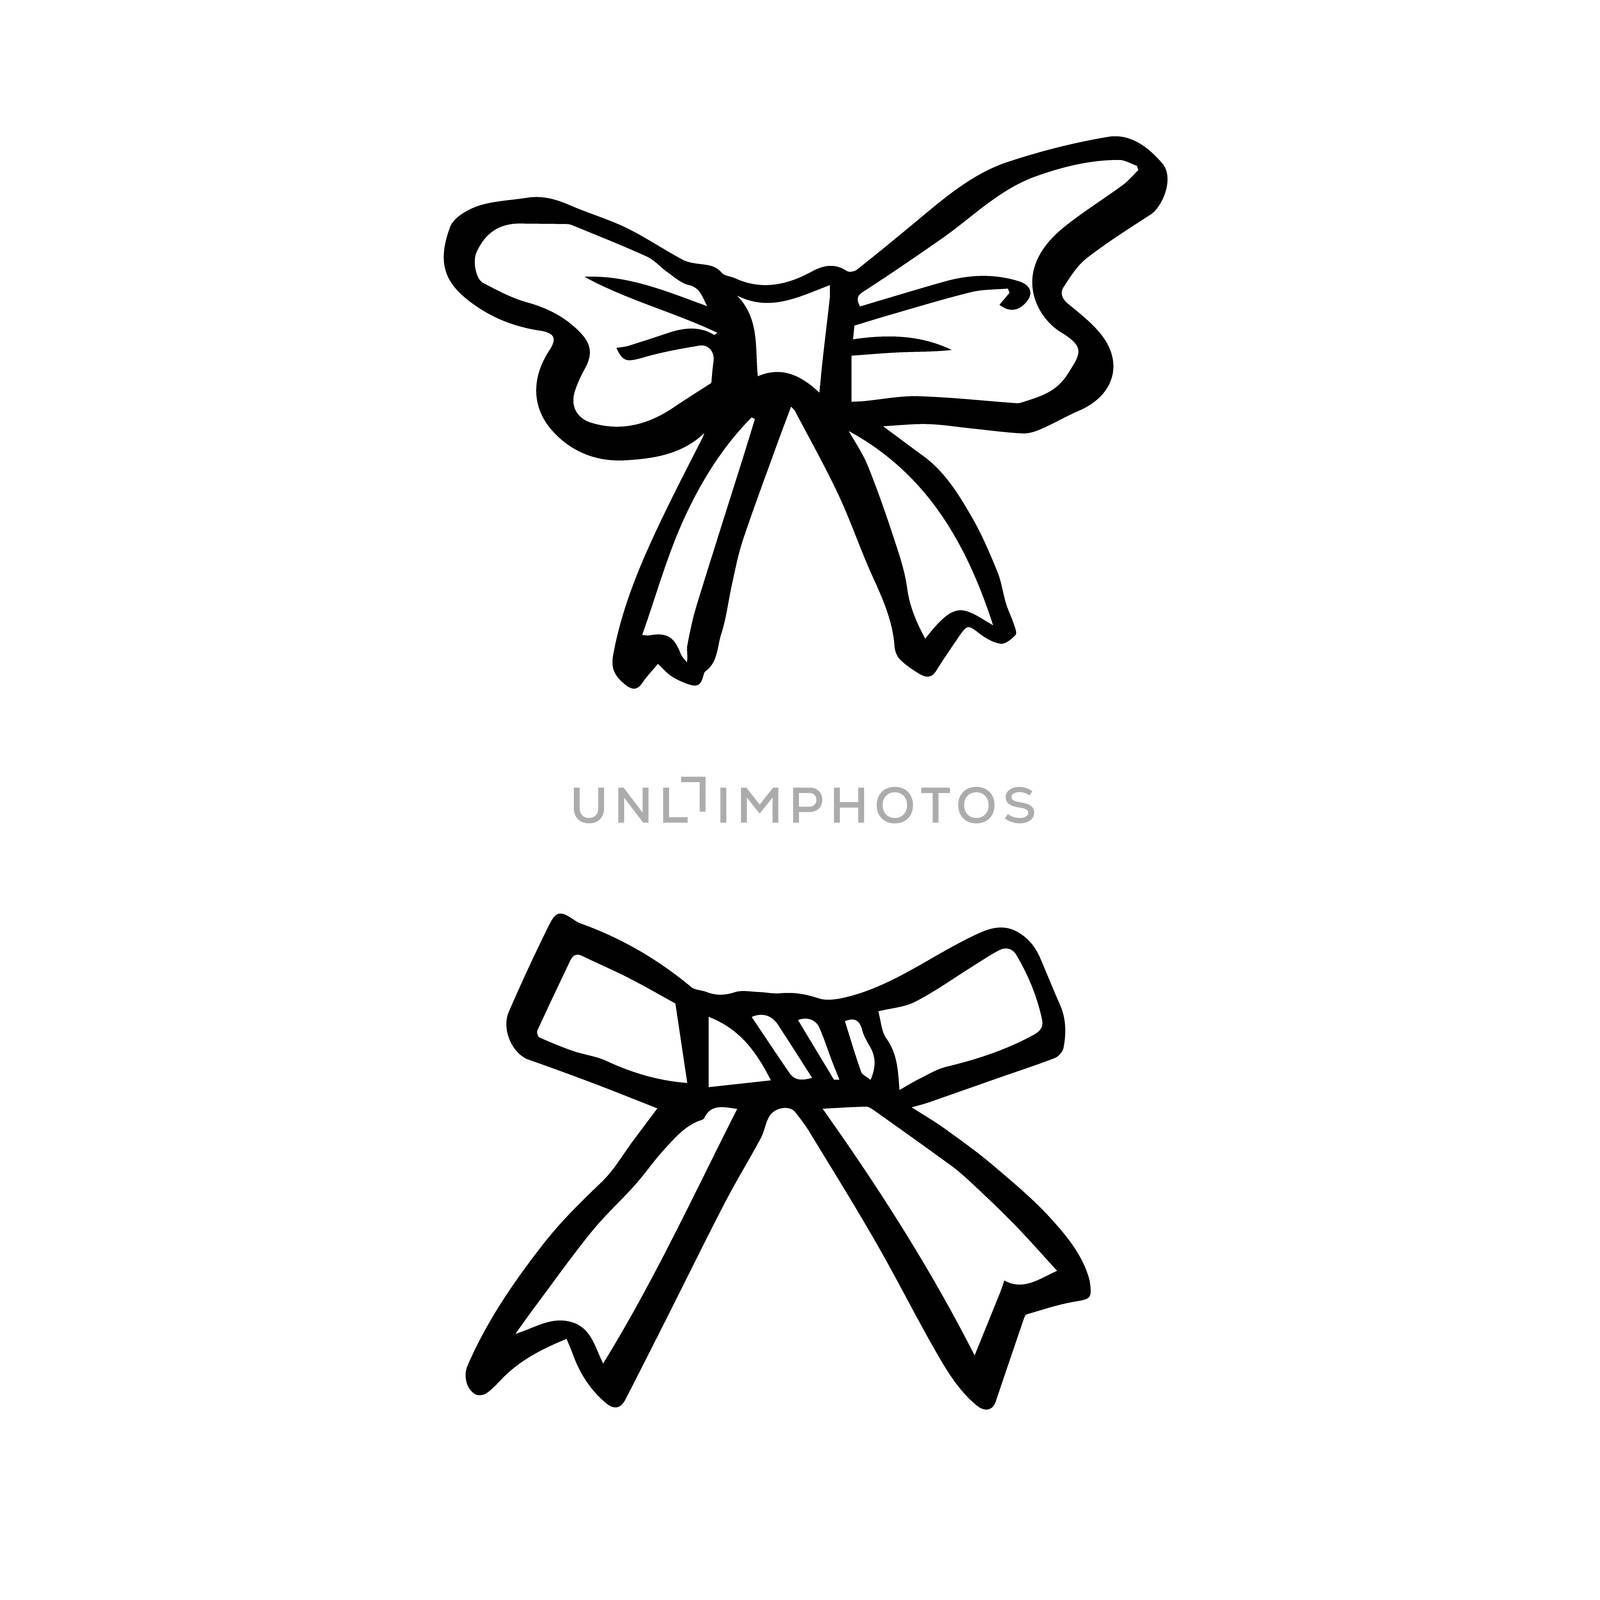 freehand sketch illustration of ribbon bows by simpleBE